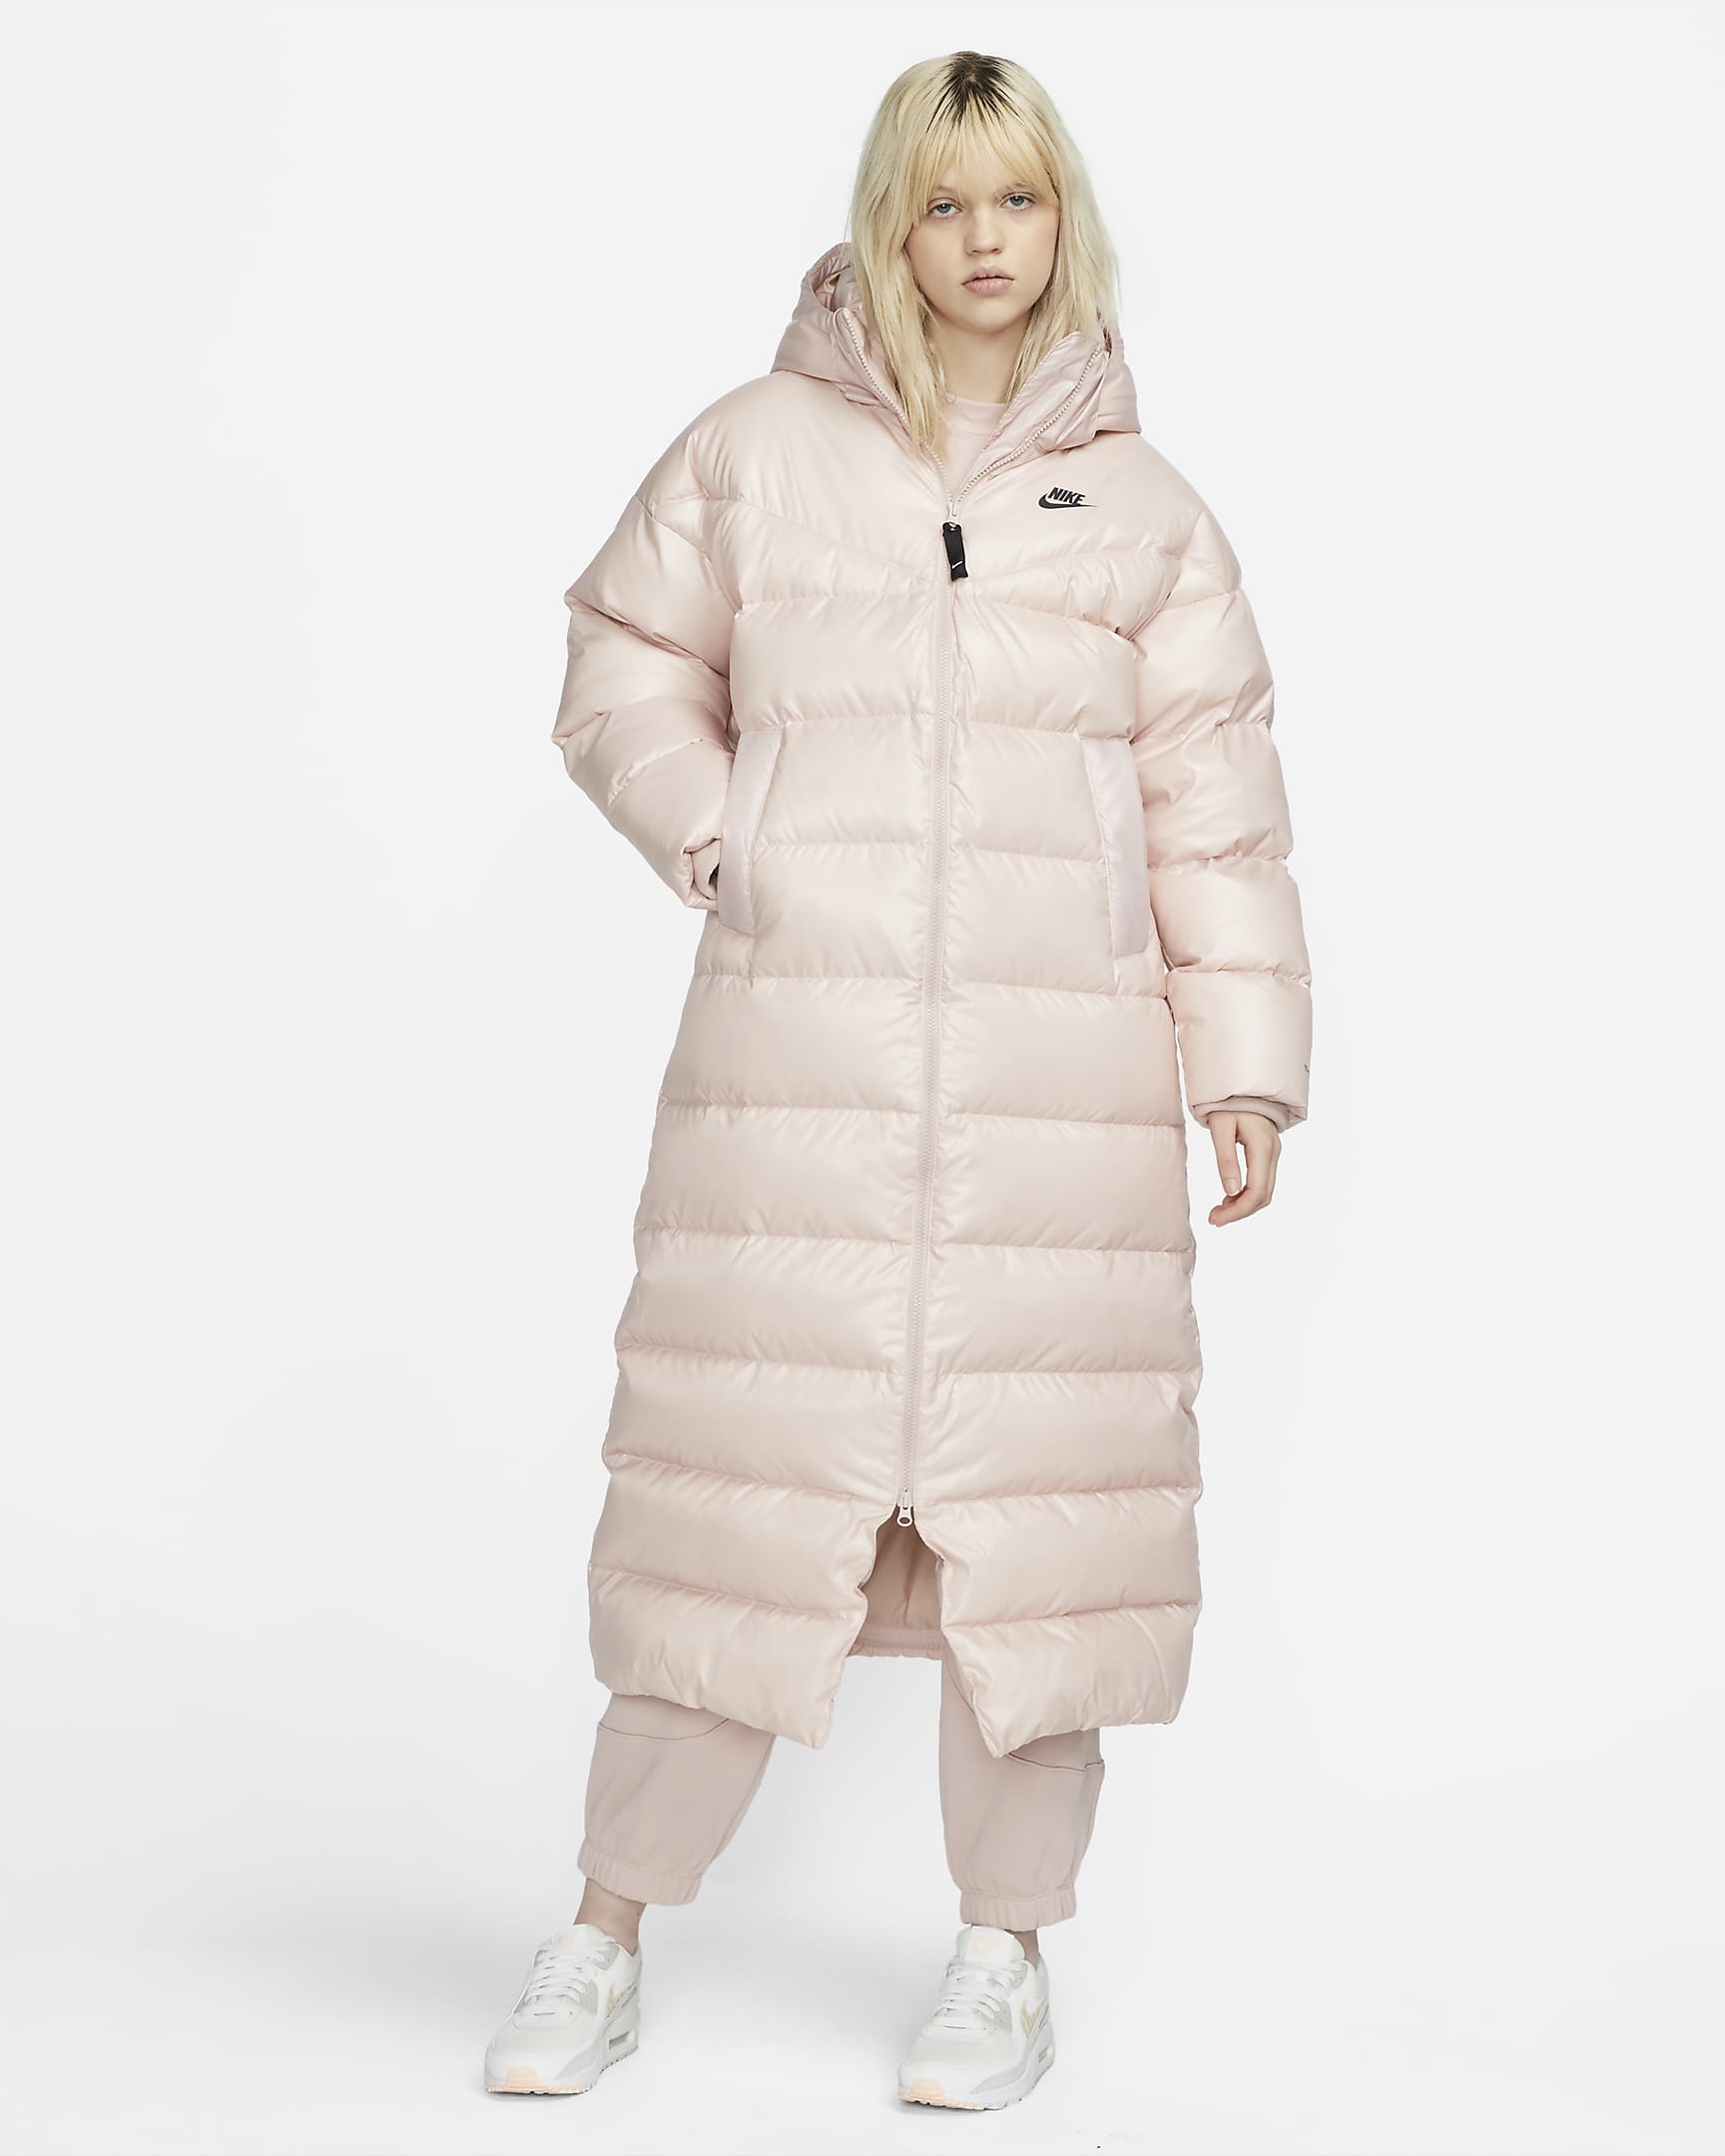 nike-sportswear-therma-fit-city-series-womens-parka-P6rzWd.png